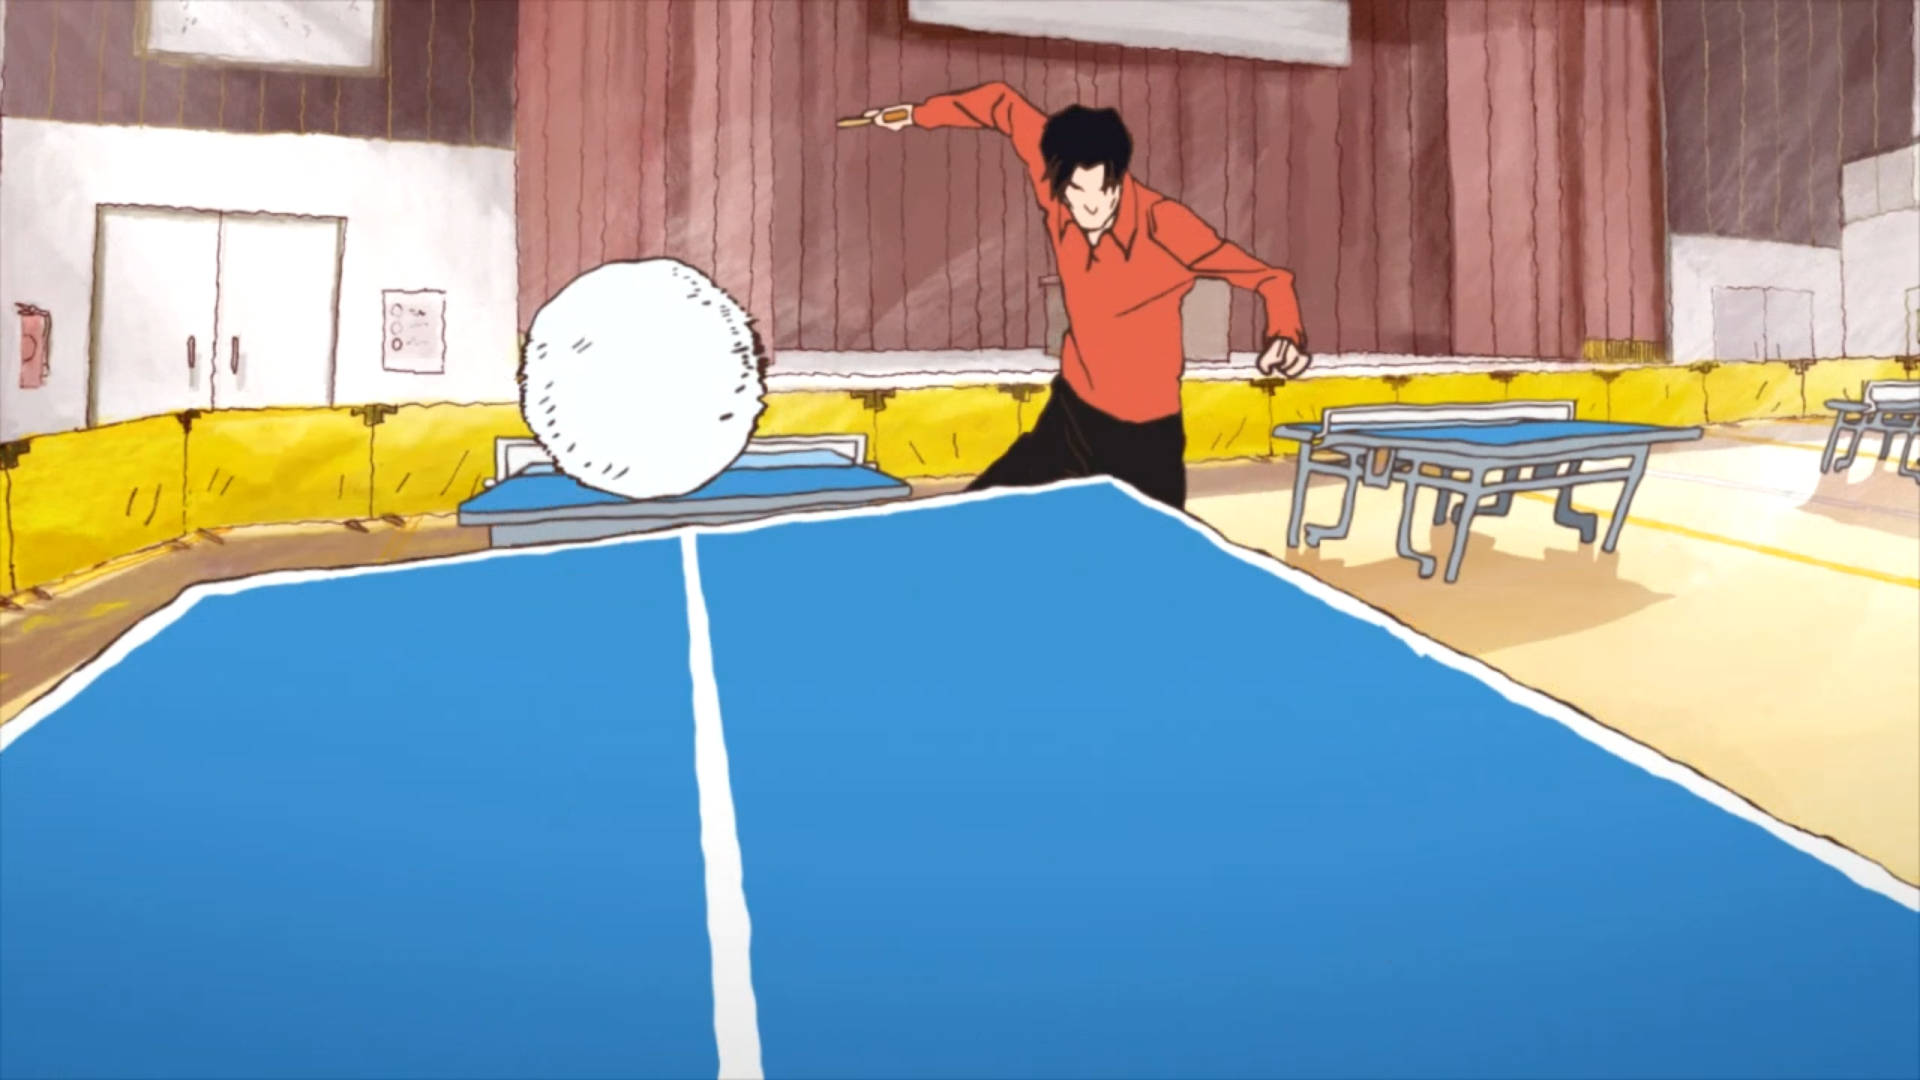 Ping Pong The Animation | page 2 of 3 - Zerochan Anime Image Board